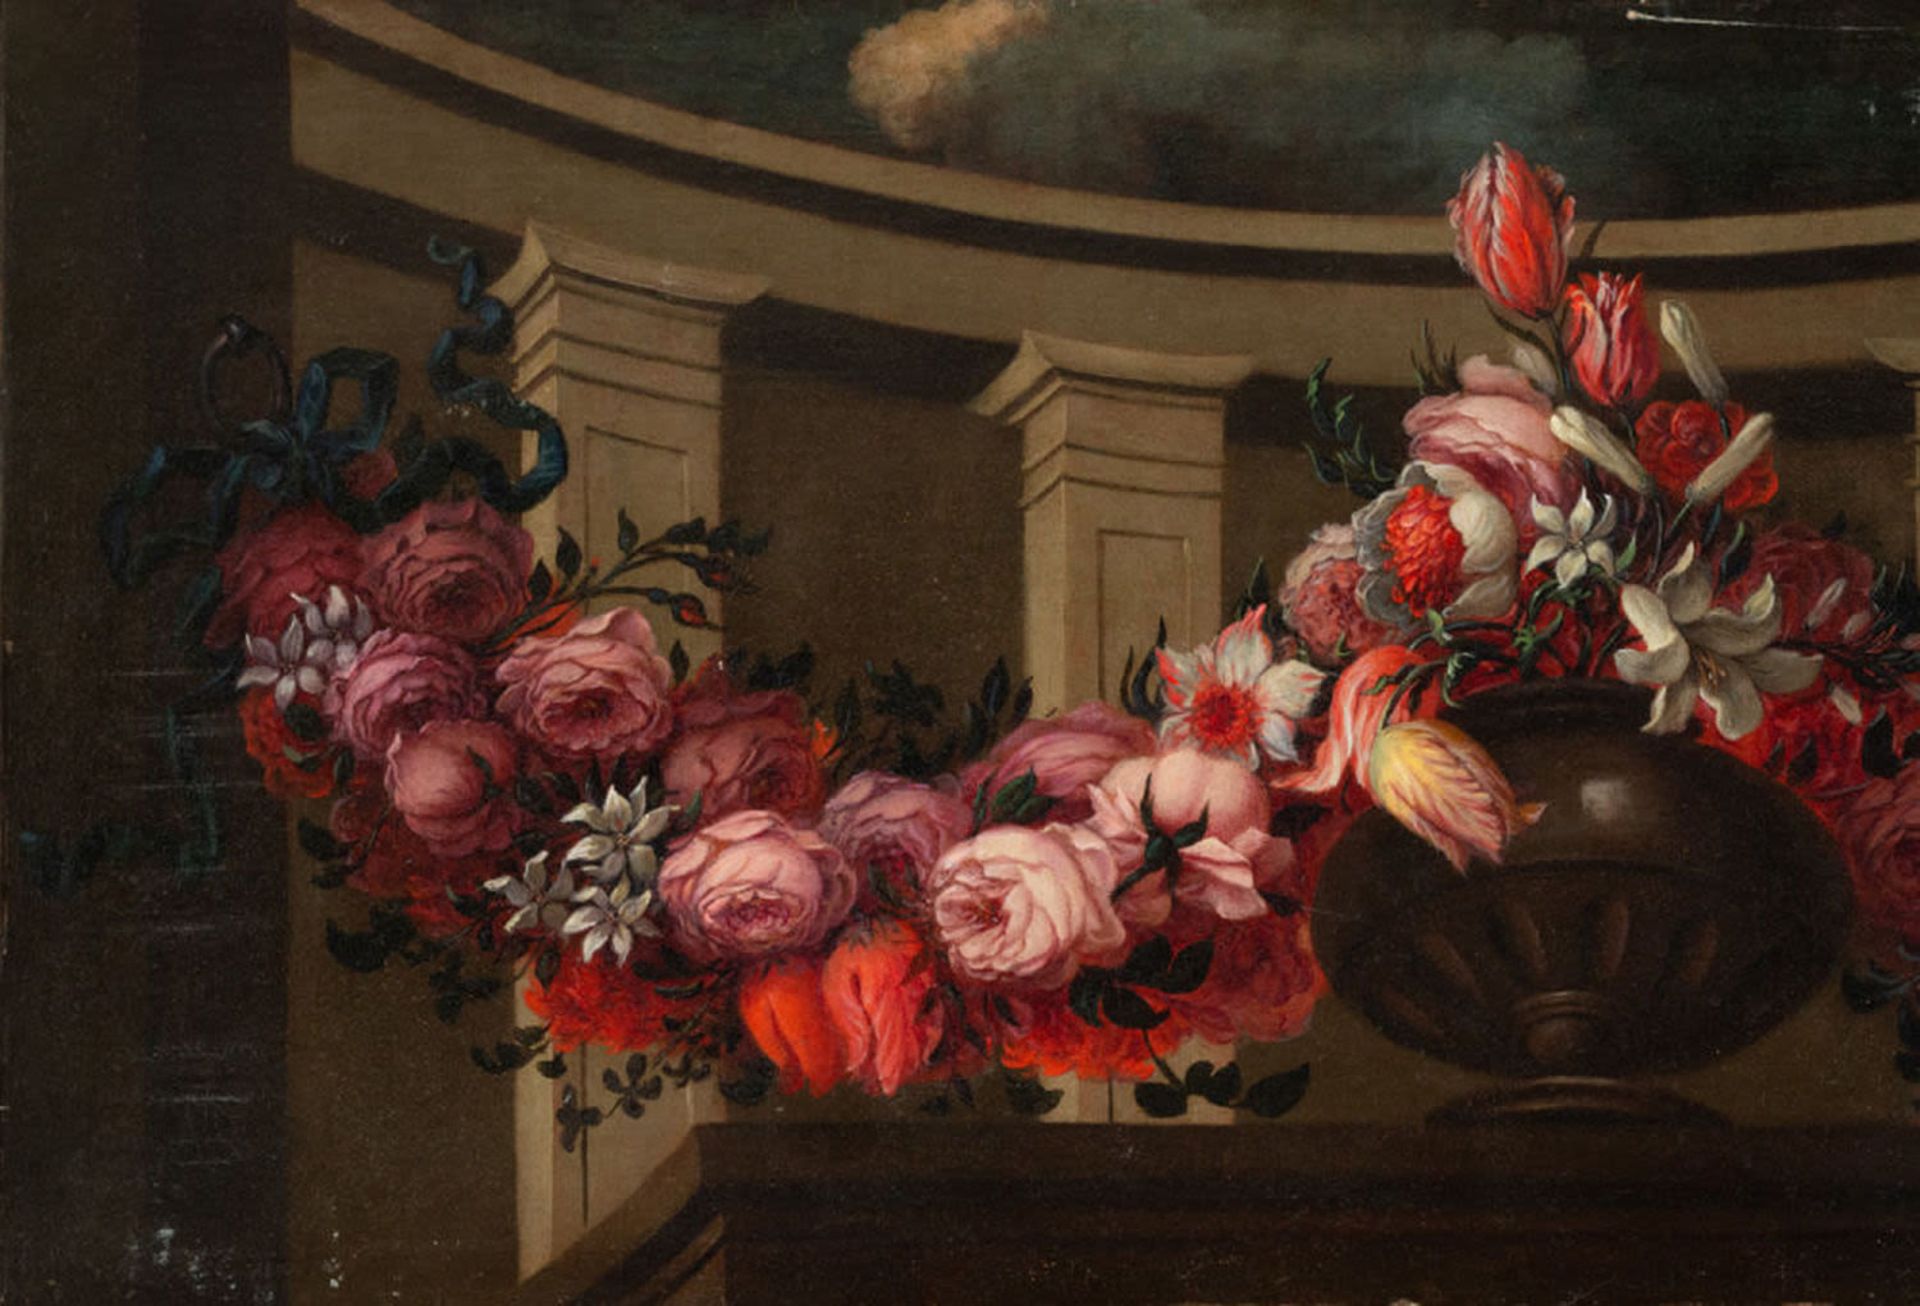 Garland of Flowers with Caprice in the background, Italian school of the 17th century - Image 3 of 4